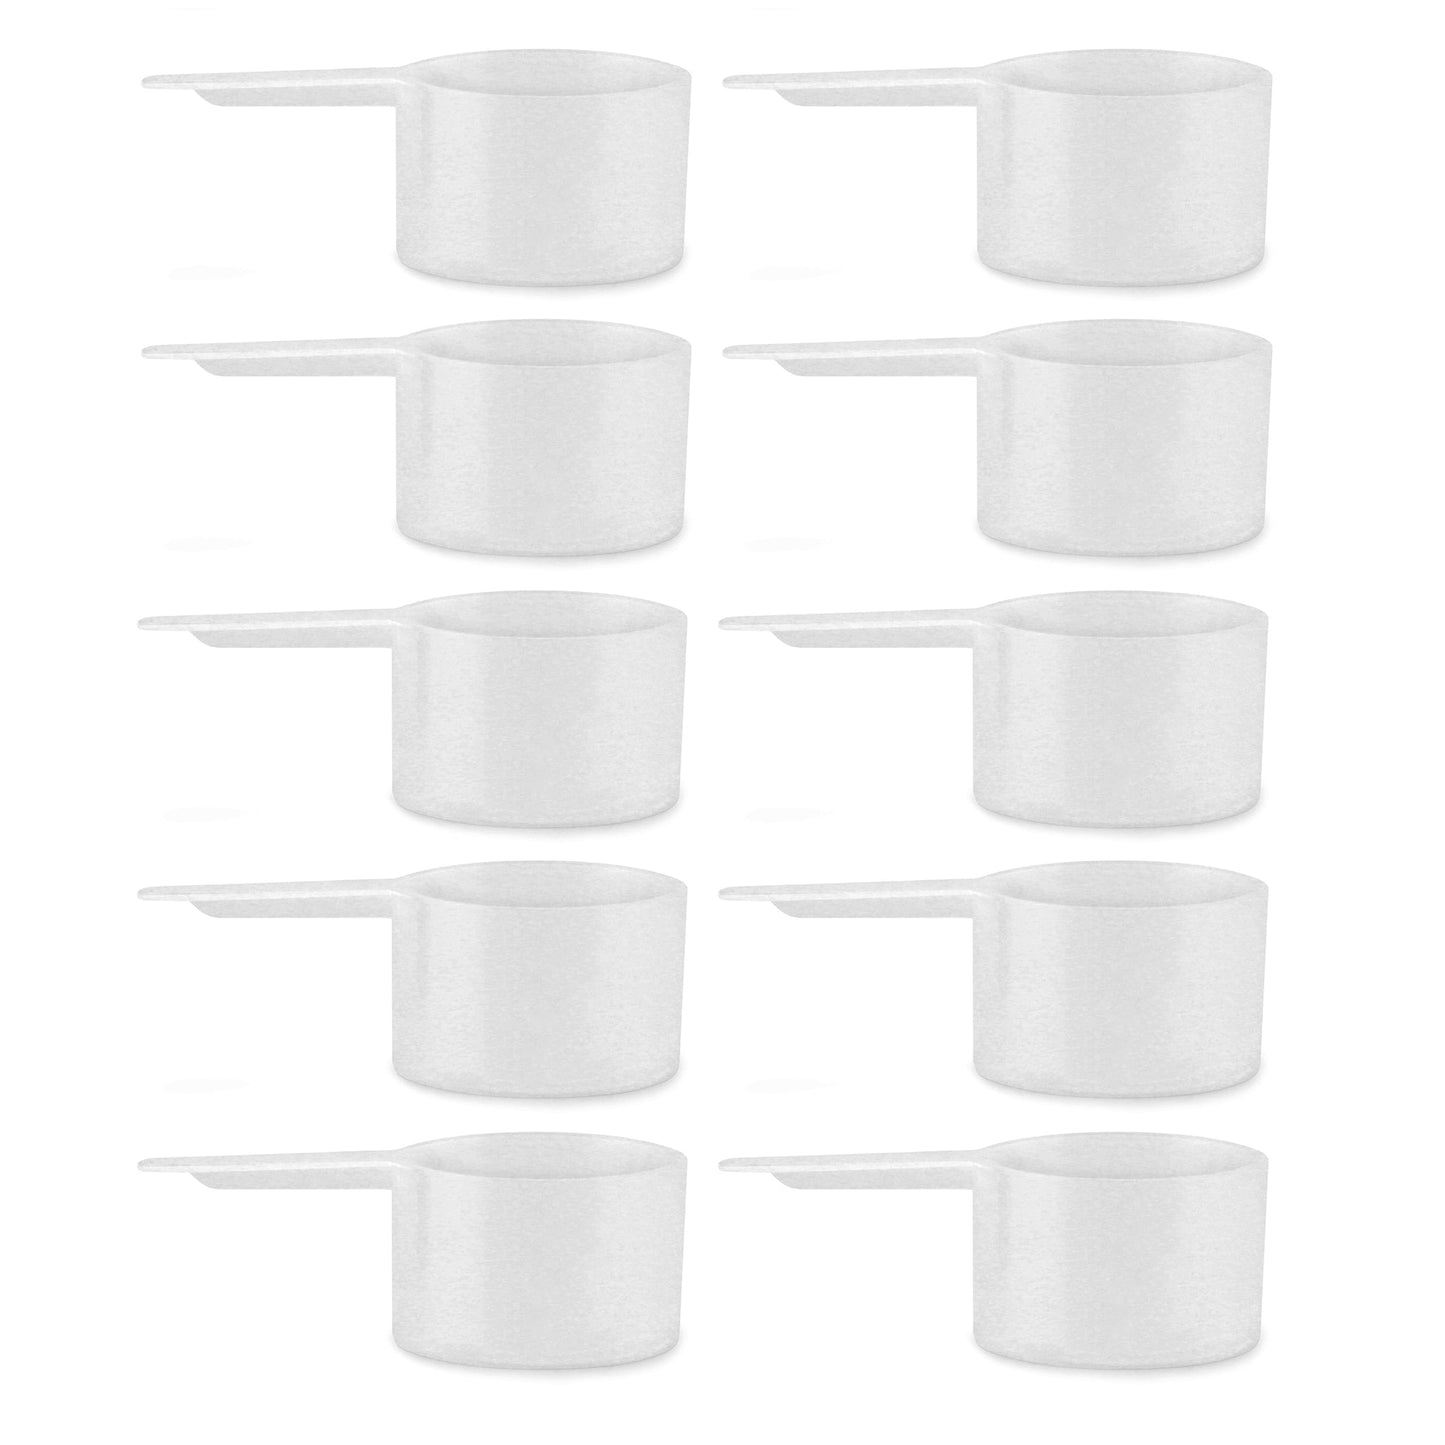 43cc / 3-Tablespoon Scoops (10-Pack) - sh1472cb0Scopp